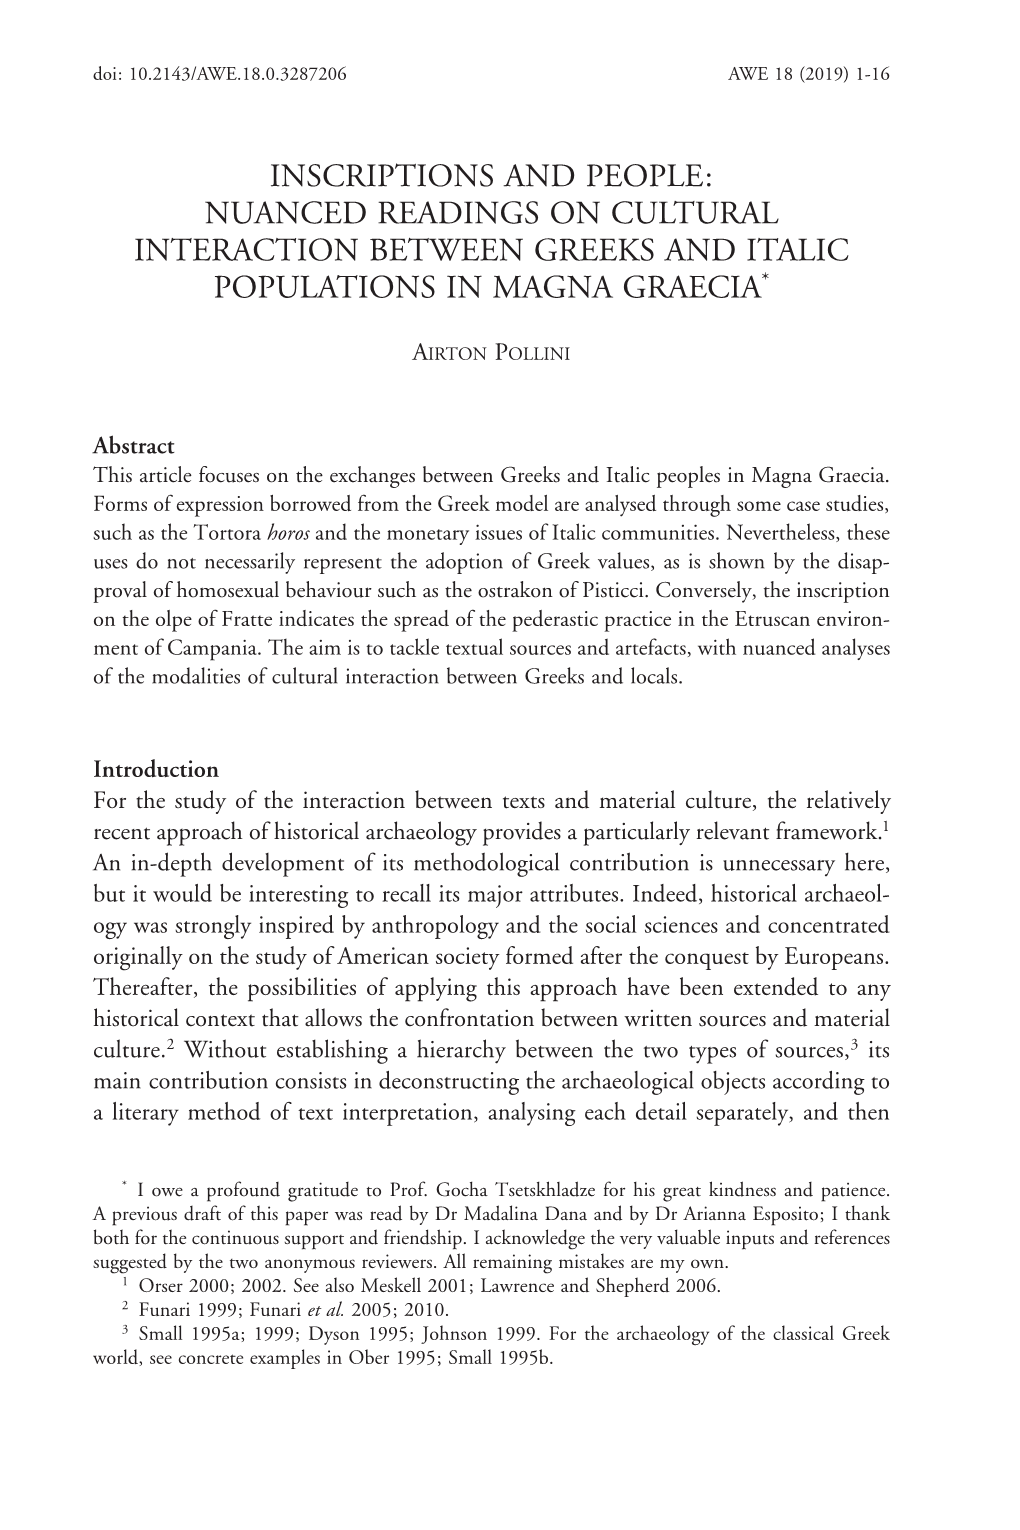 Inscriptions and People: Nuanced Readings on Cultural Interaction Between Greeks and Italic Populations in Magna Graecia*